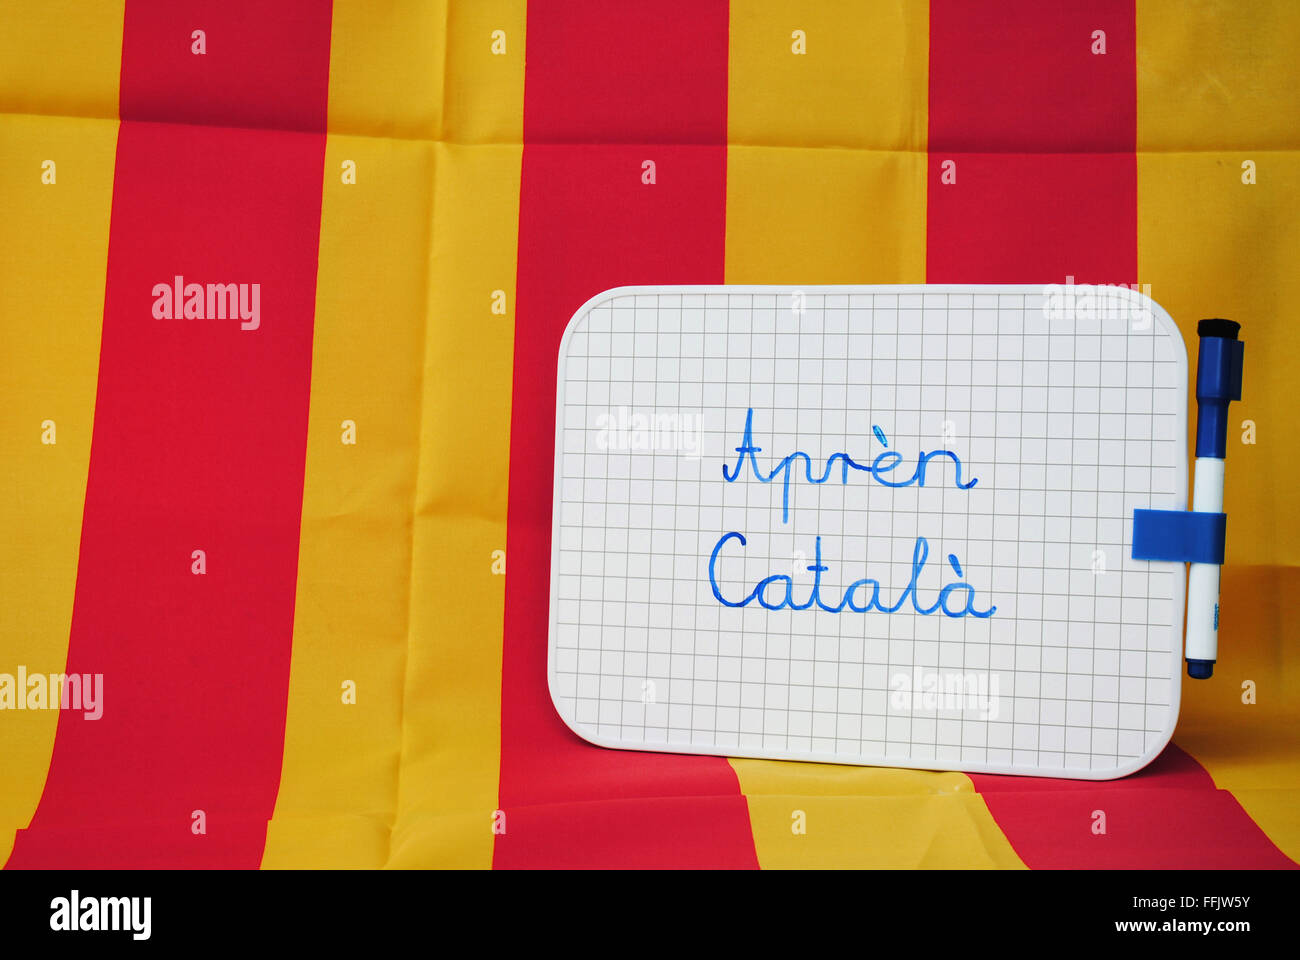 'Learn Catalan' in Catalan written on a small whiteboard against a yellow and red - Catalan flag - background. Stock Photo